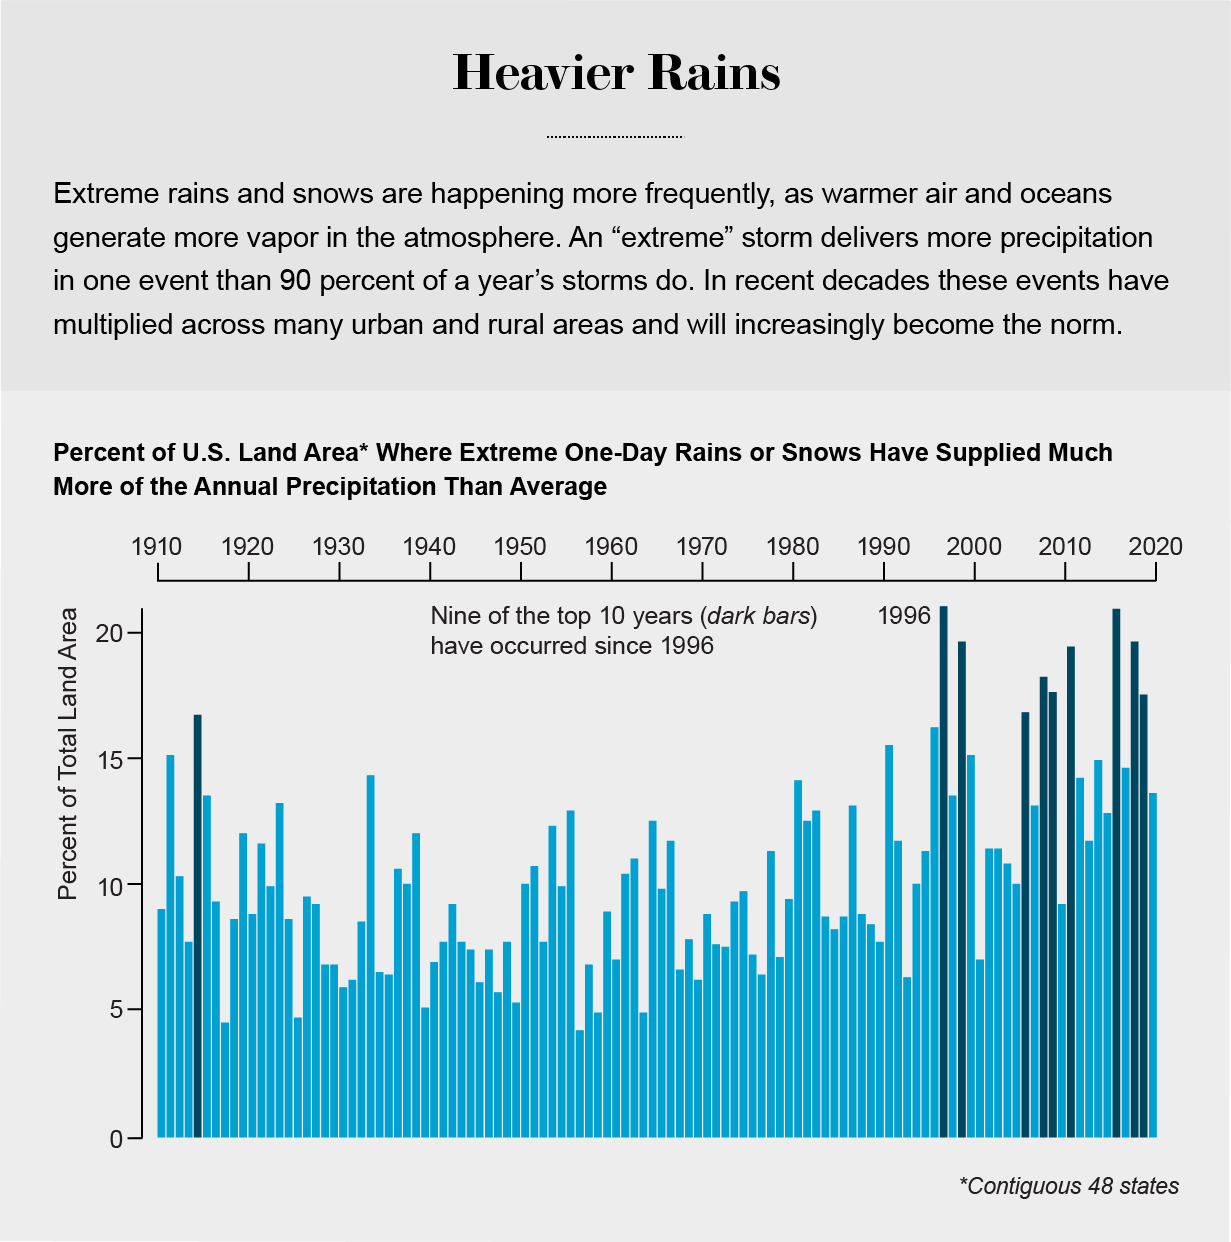 Bar graph shows increasing frequency of extreme storms in the U.S. from 1910 to 2020.